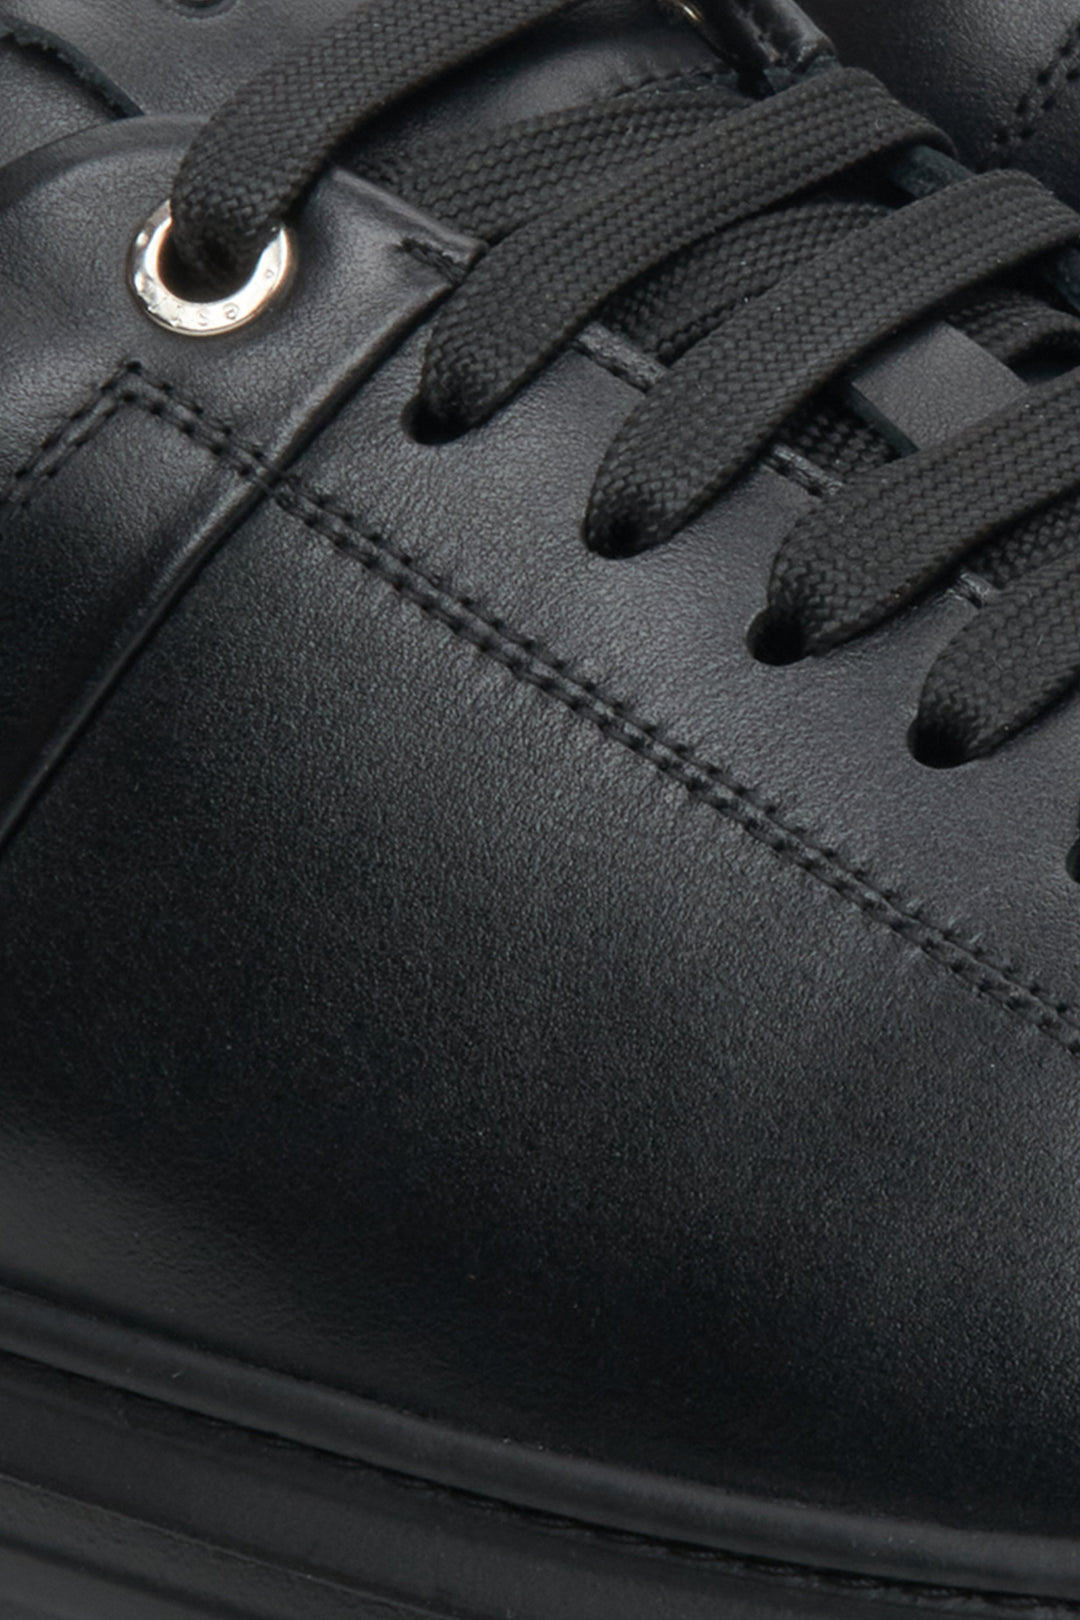 Low, black Estro men's sneakers with lacing - close-up on the heel and side line.